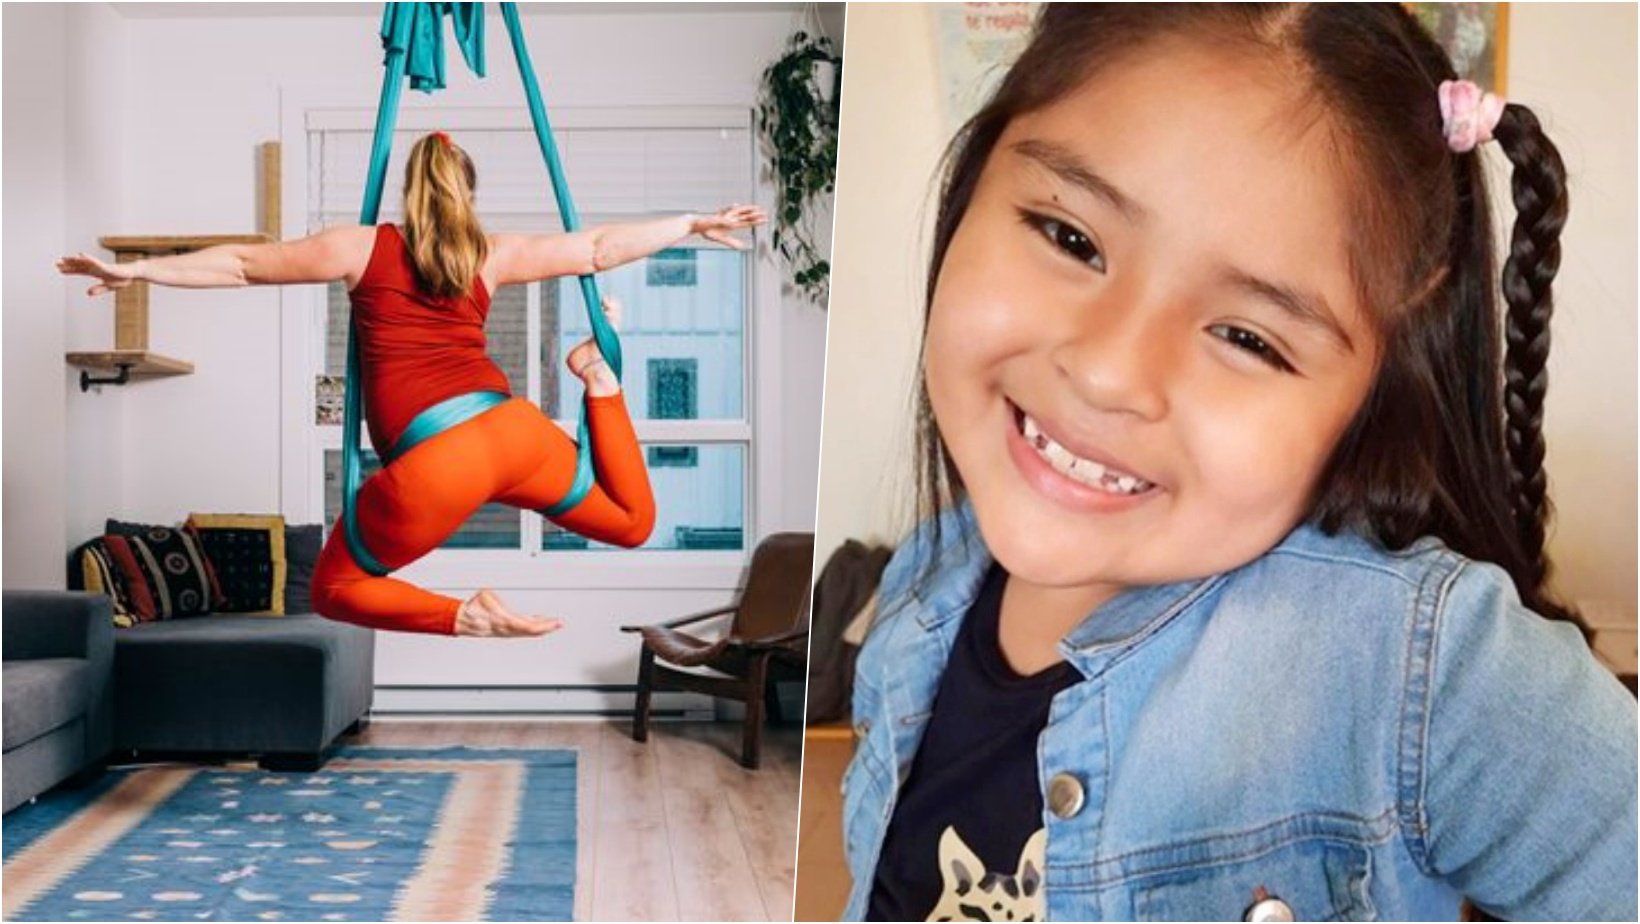 6 facebook cover 1.jpg?resize=1200,630 - 8-Year-Old Dies While Practicing Acrobatics With Ribbons After Accidentally Hanging Herself In Her Room